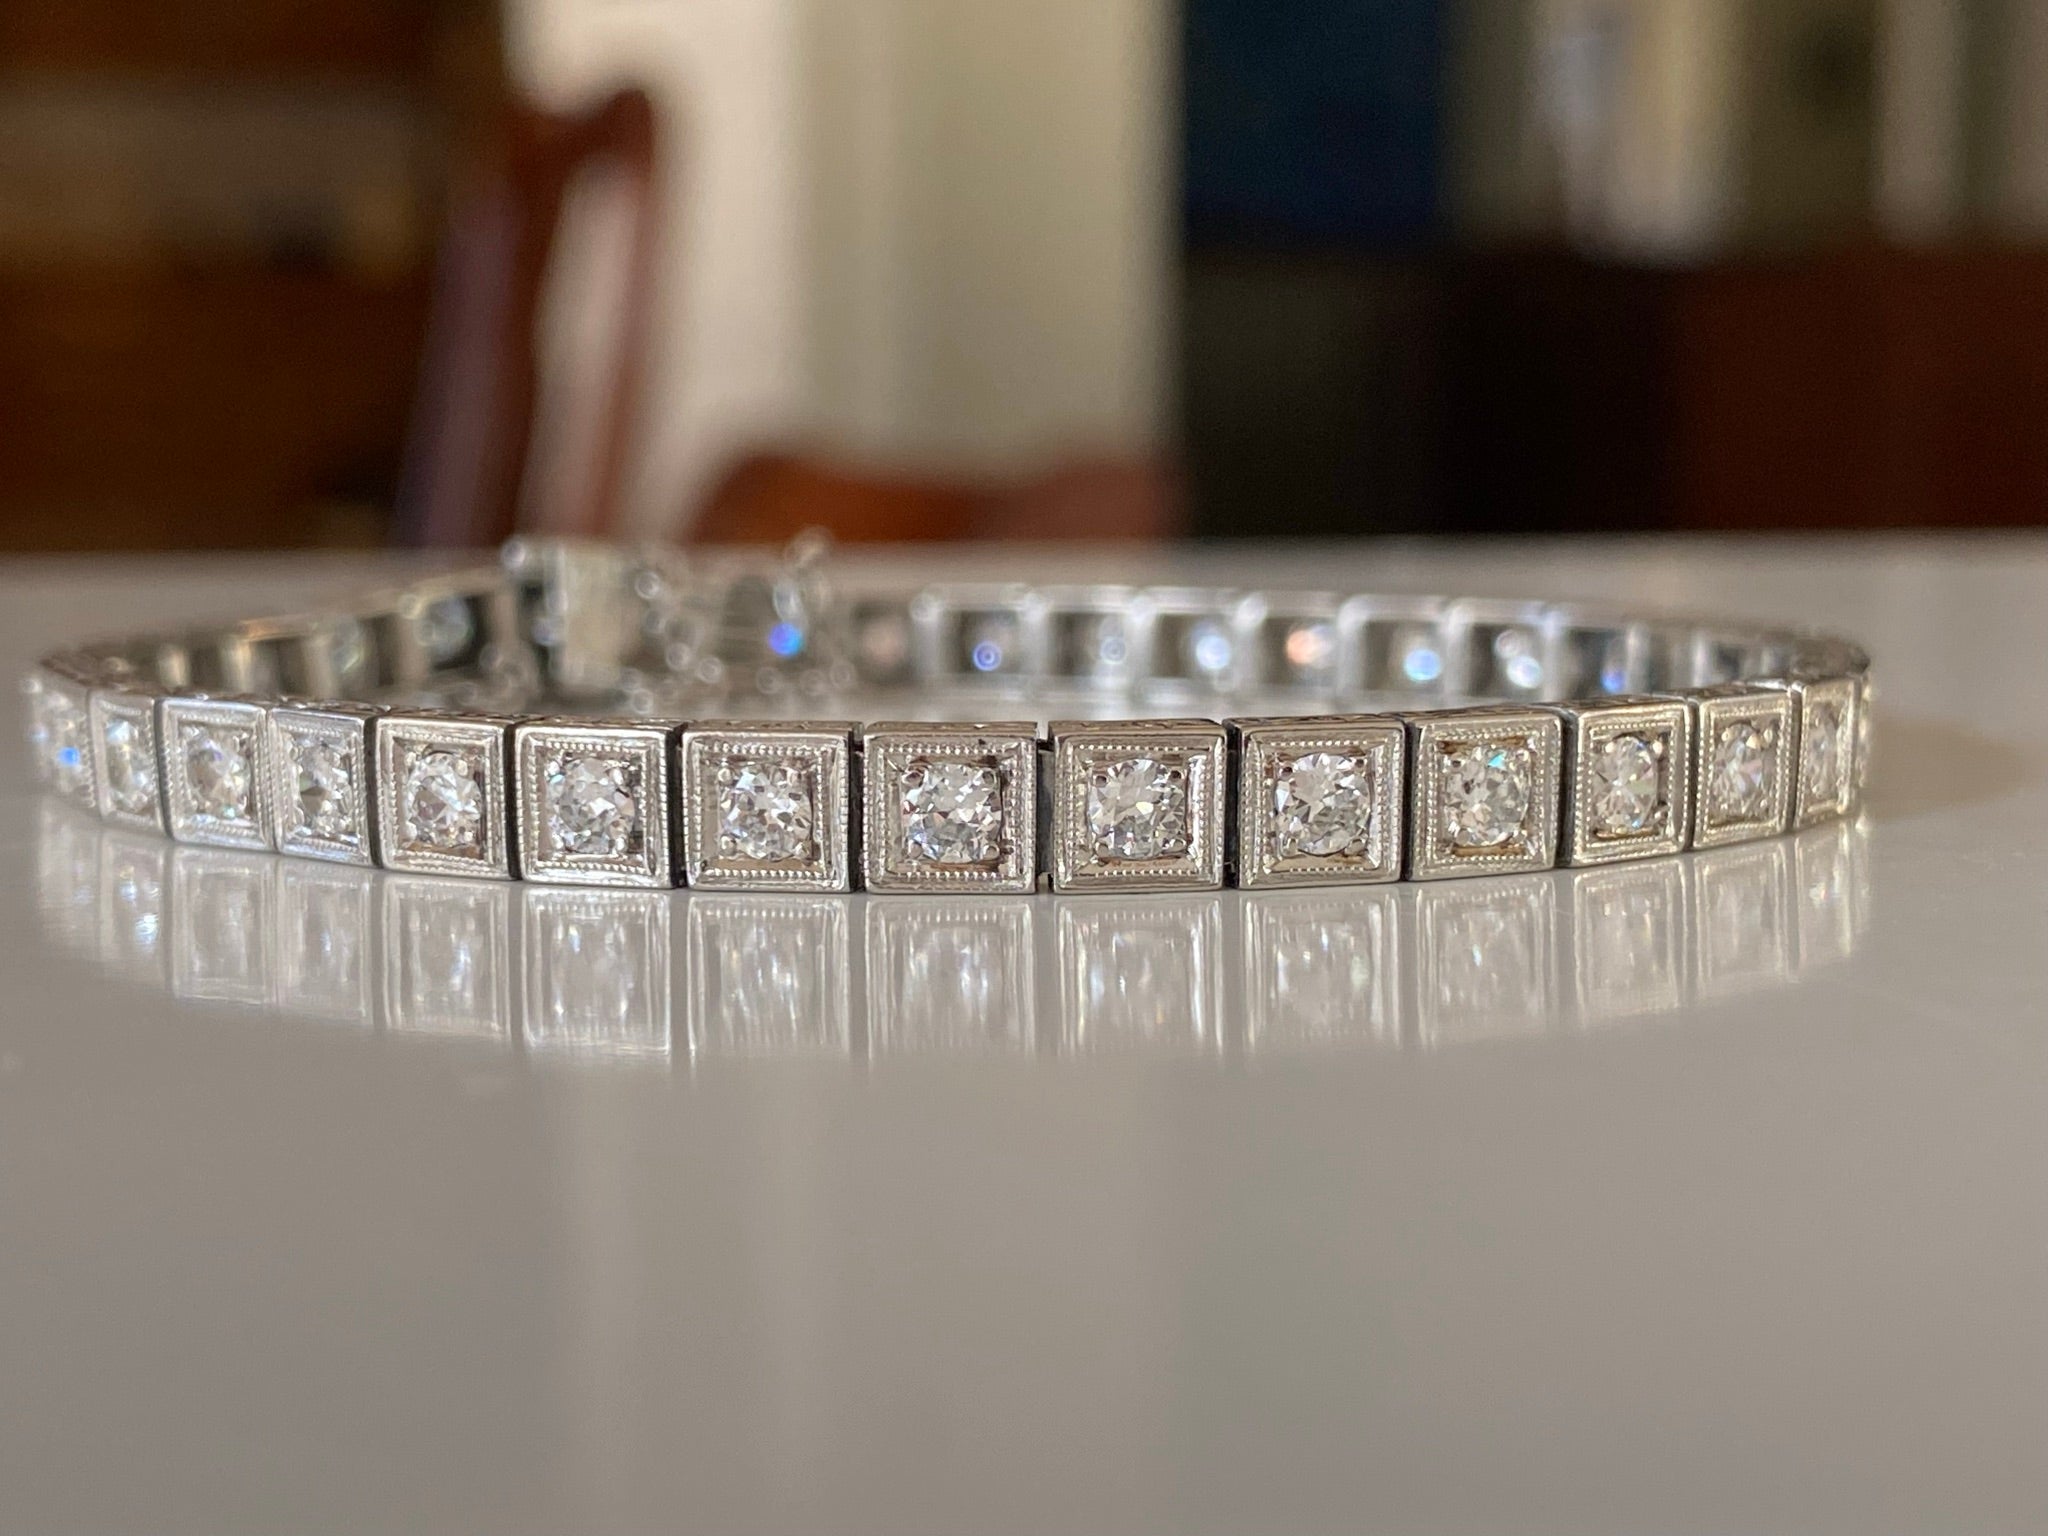 Crafted in the 1930s in platinum, this dazzling Art Deco link bracelet is designed around thirty-seven natural Old European cut diamonds in a square setting accented with delicate milgraining and an intricate floral motif hand engraved on the sides.